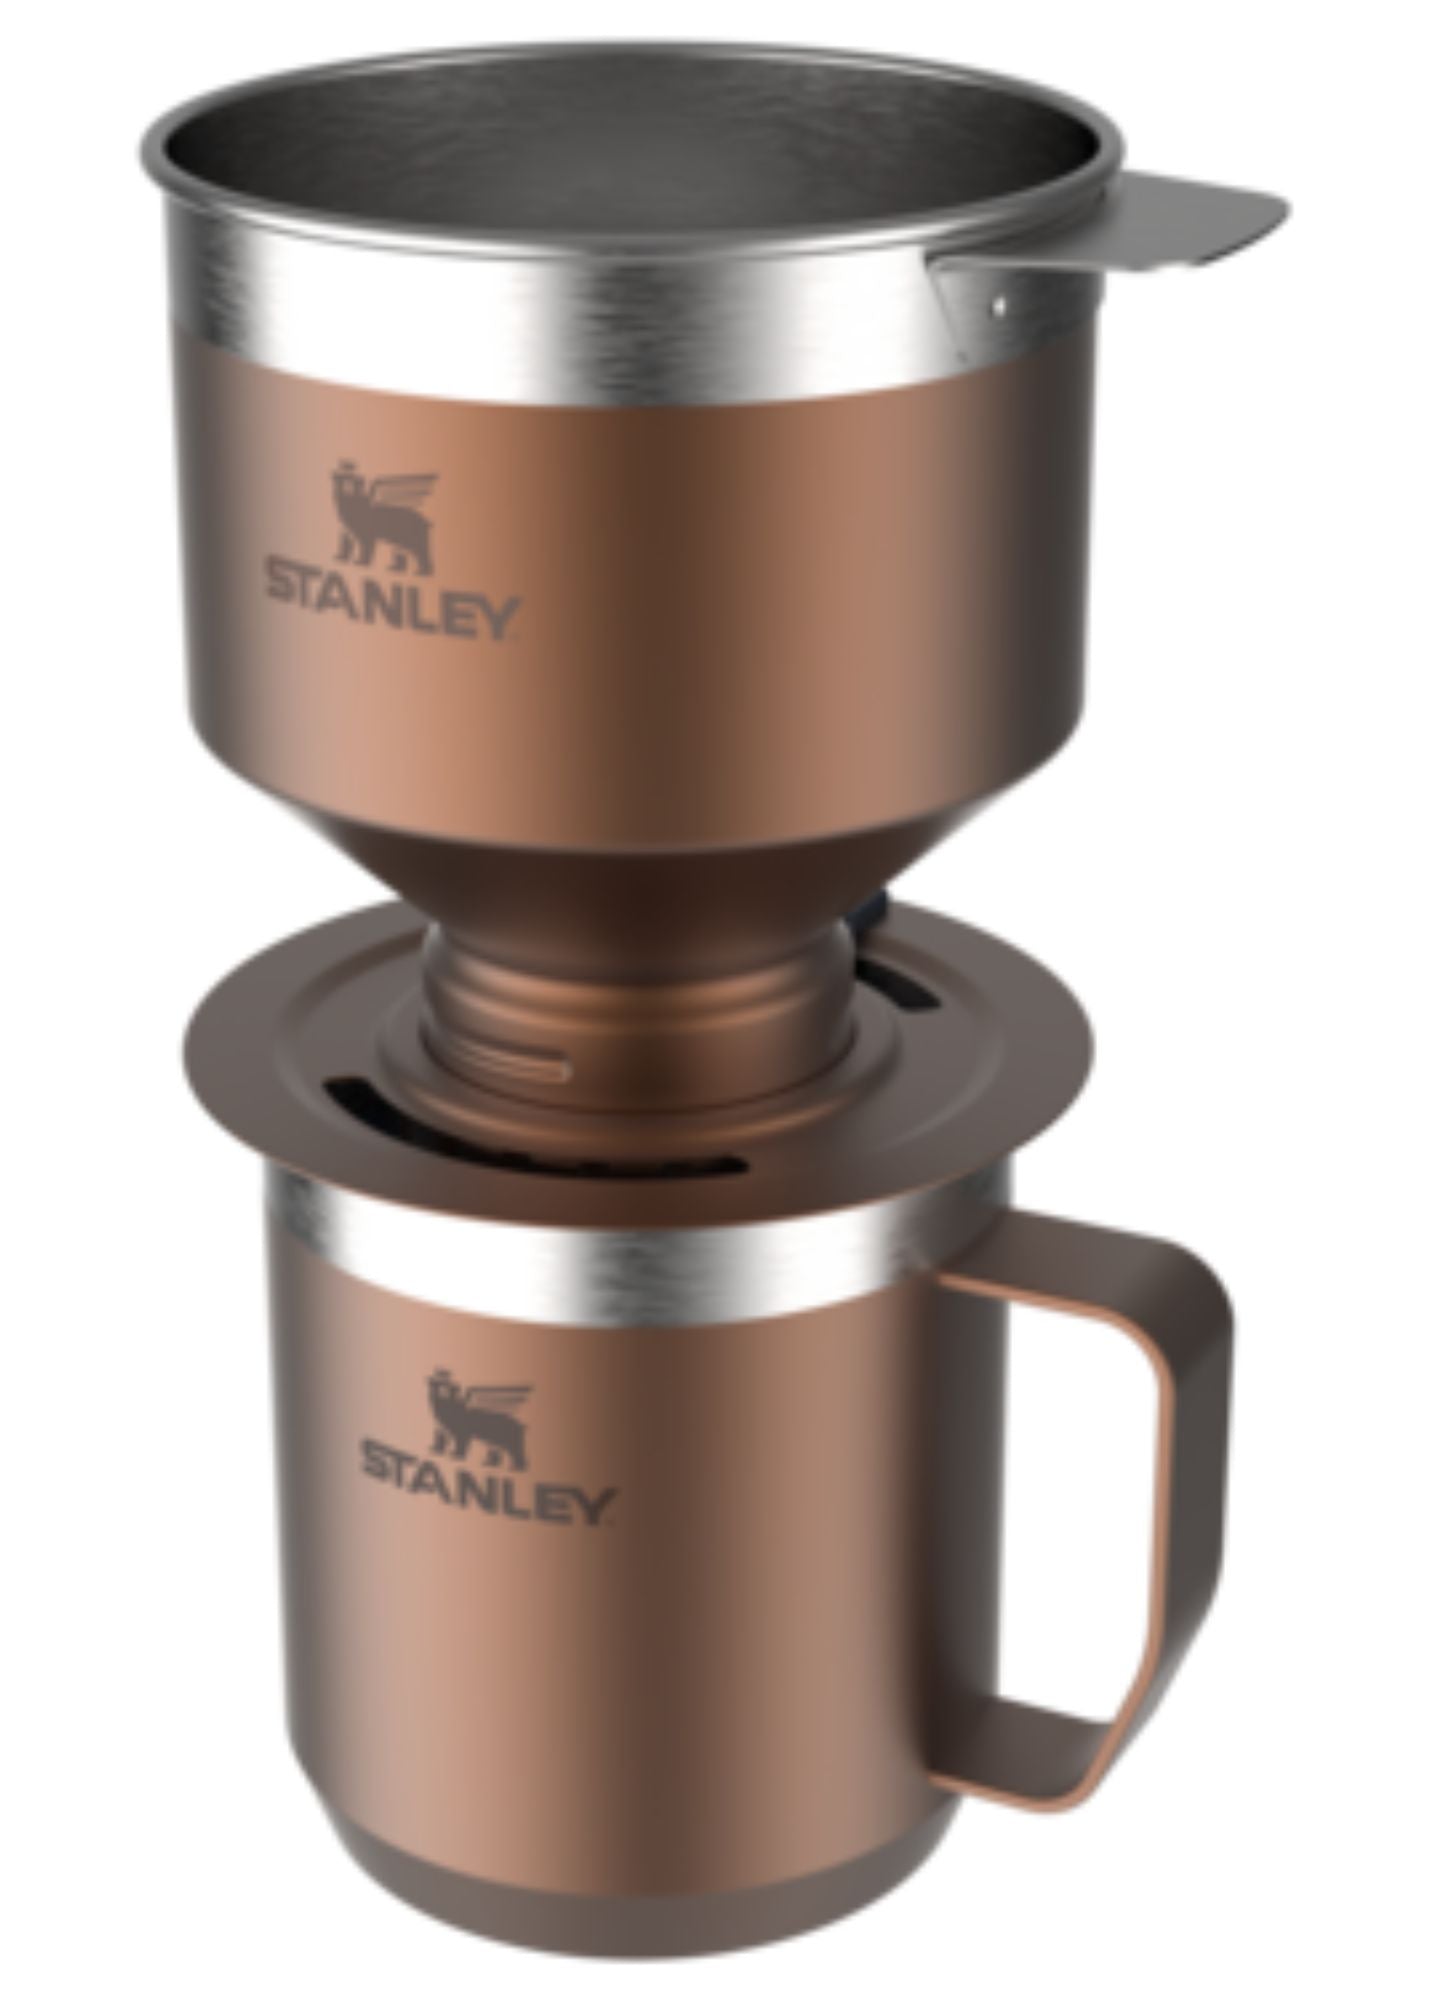 Stanley 1913 - Now Available in Arcata!